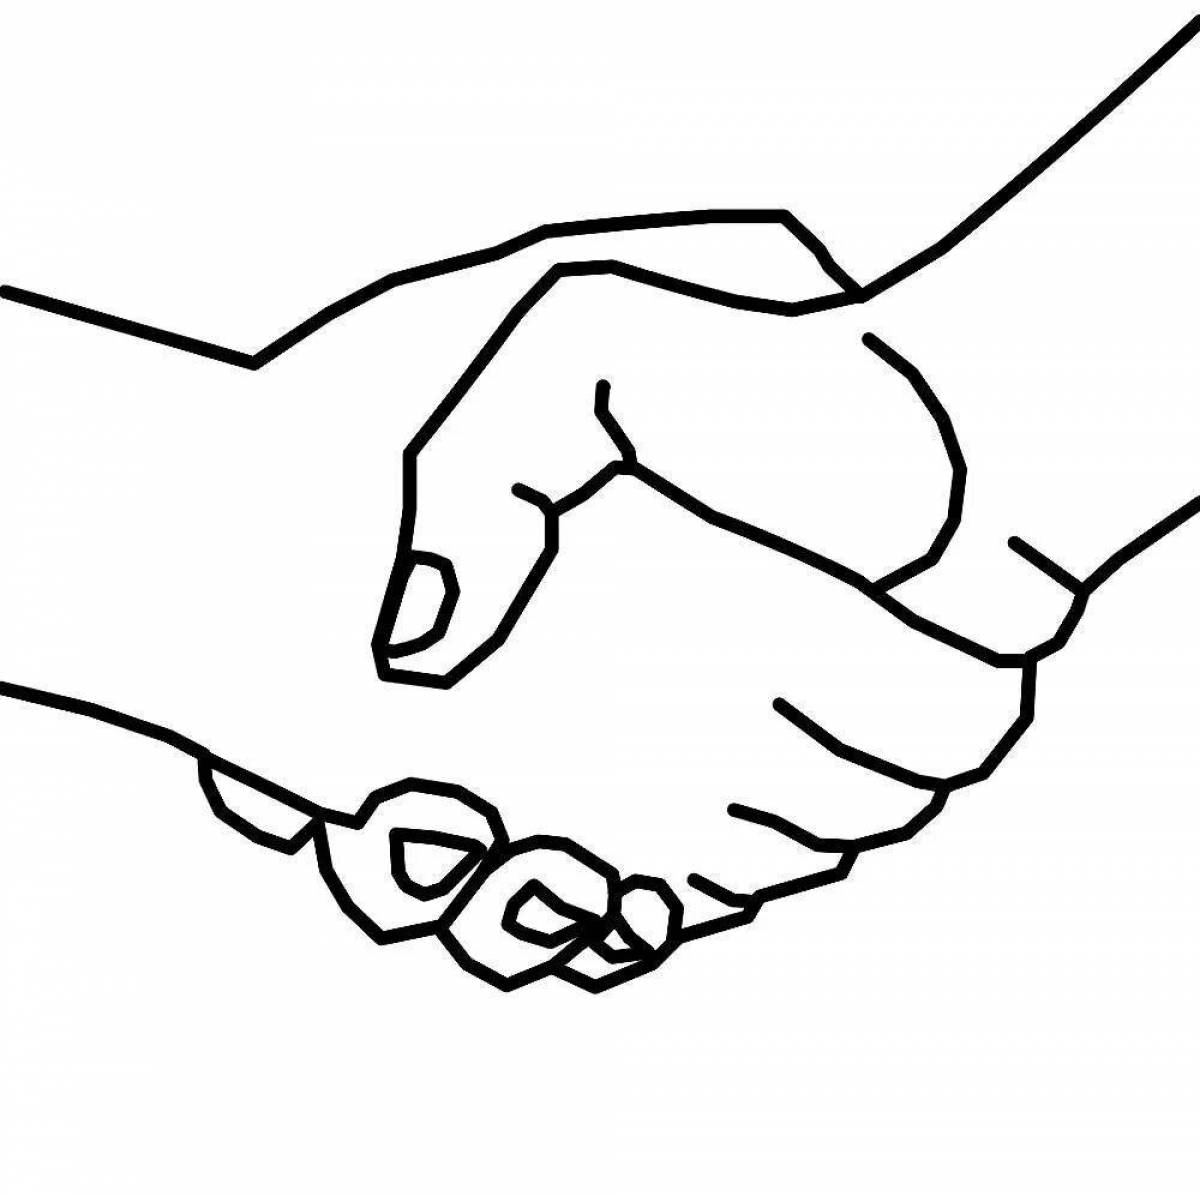 Colorful handshake coloring page for kids